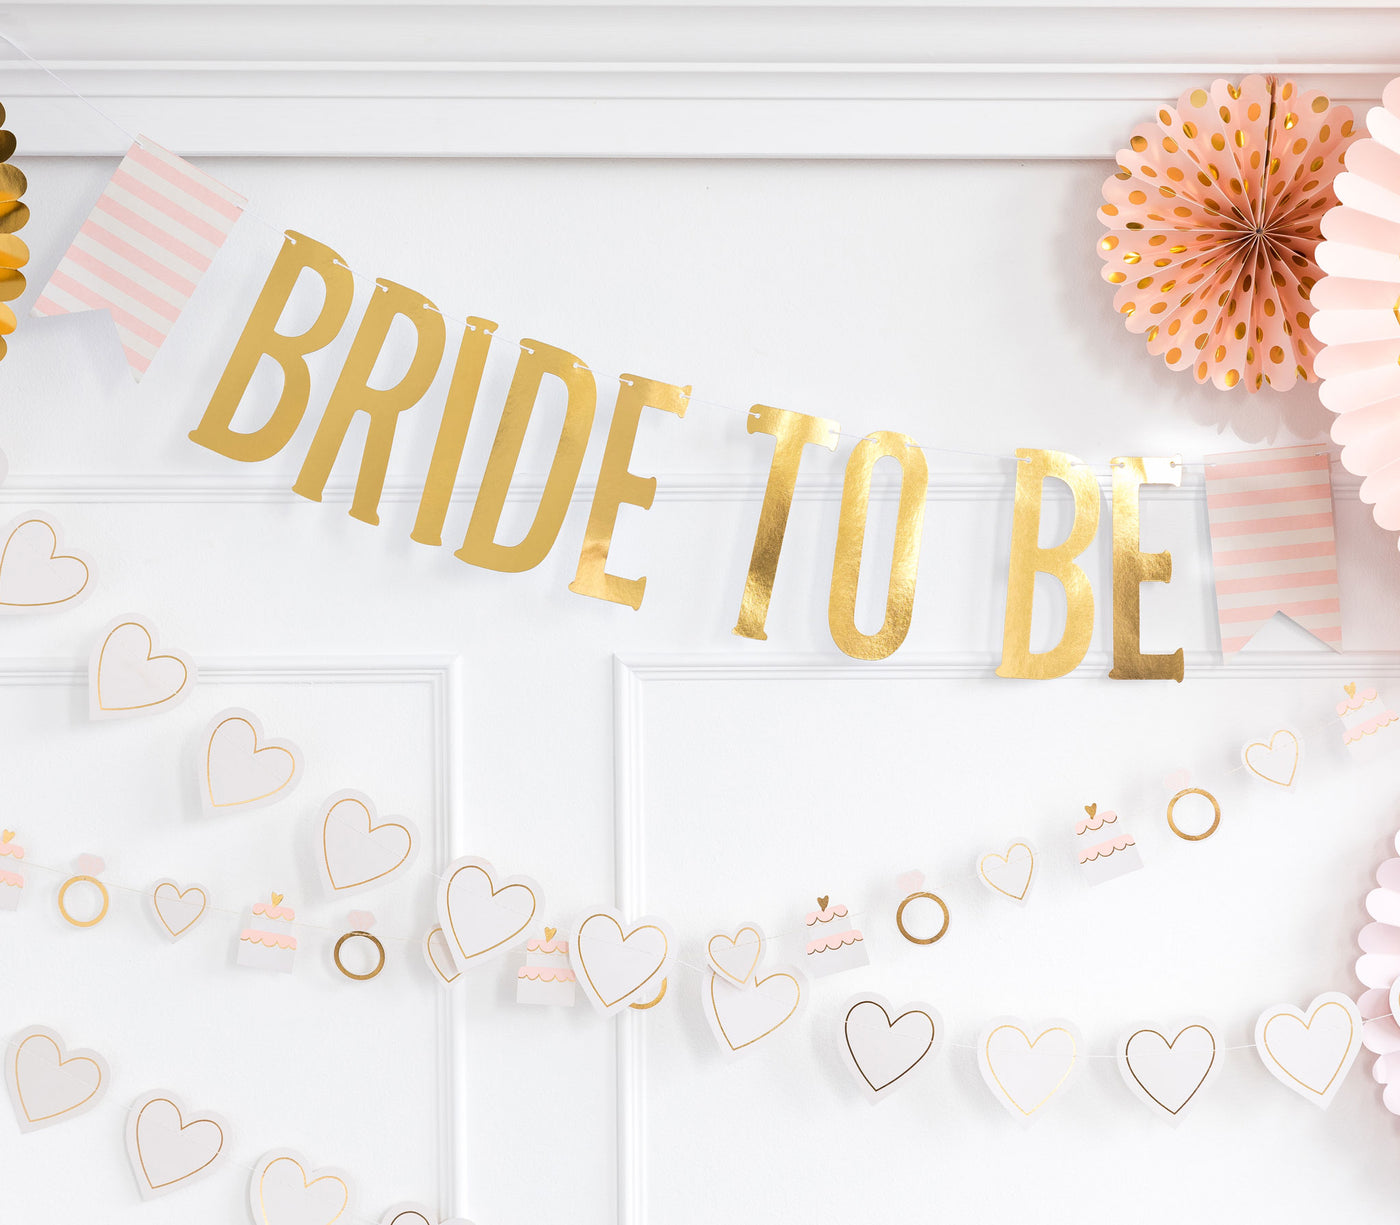 BTB702-Bride To Be Word Banner